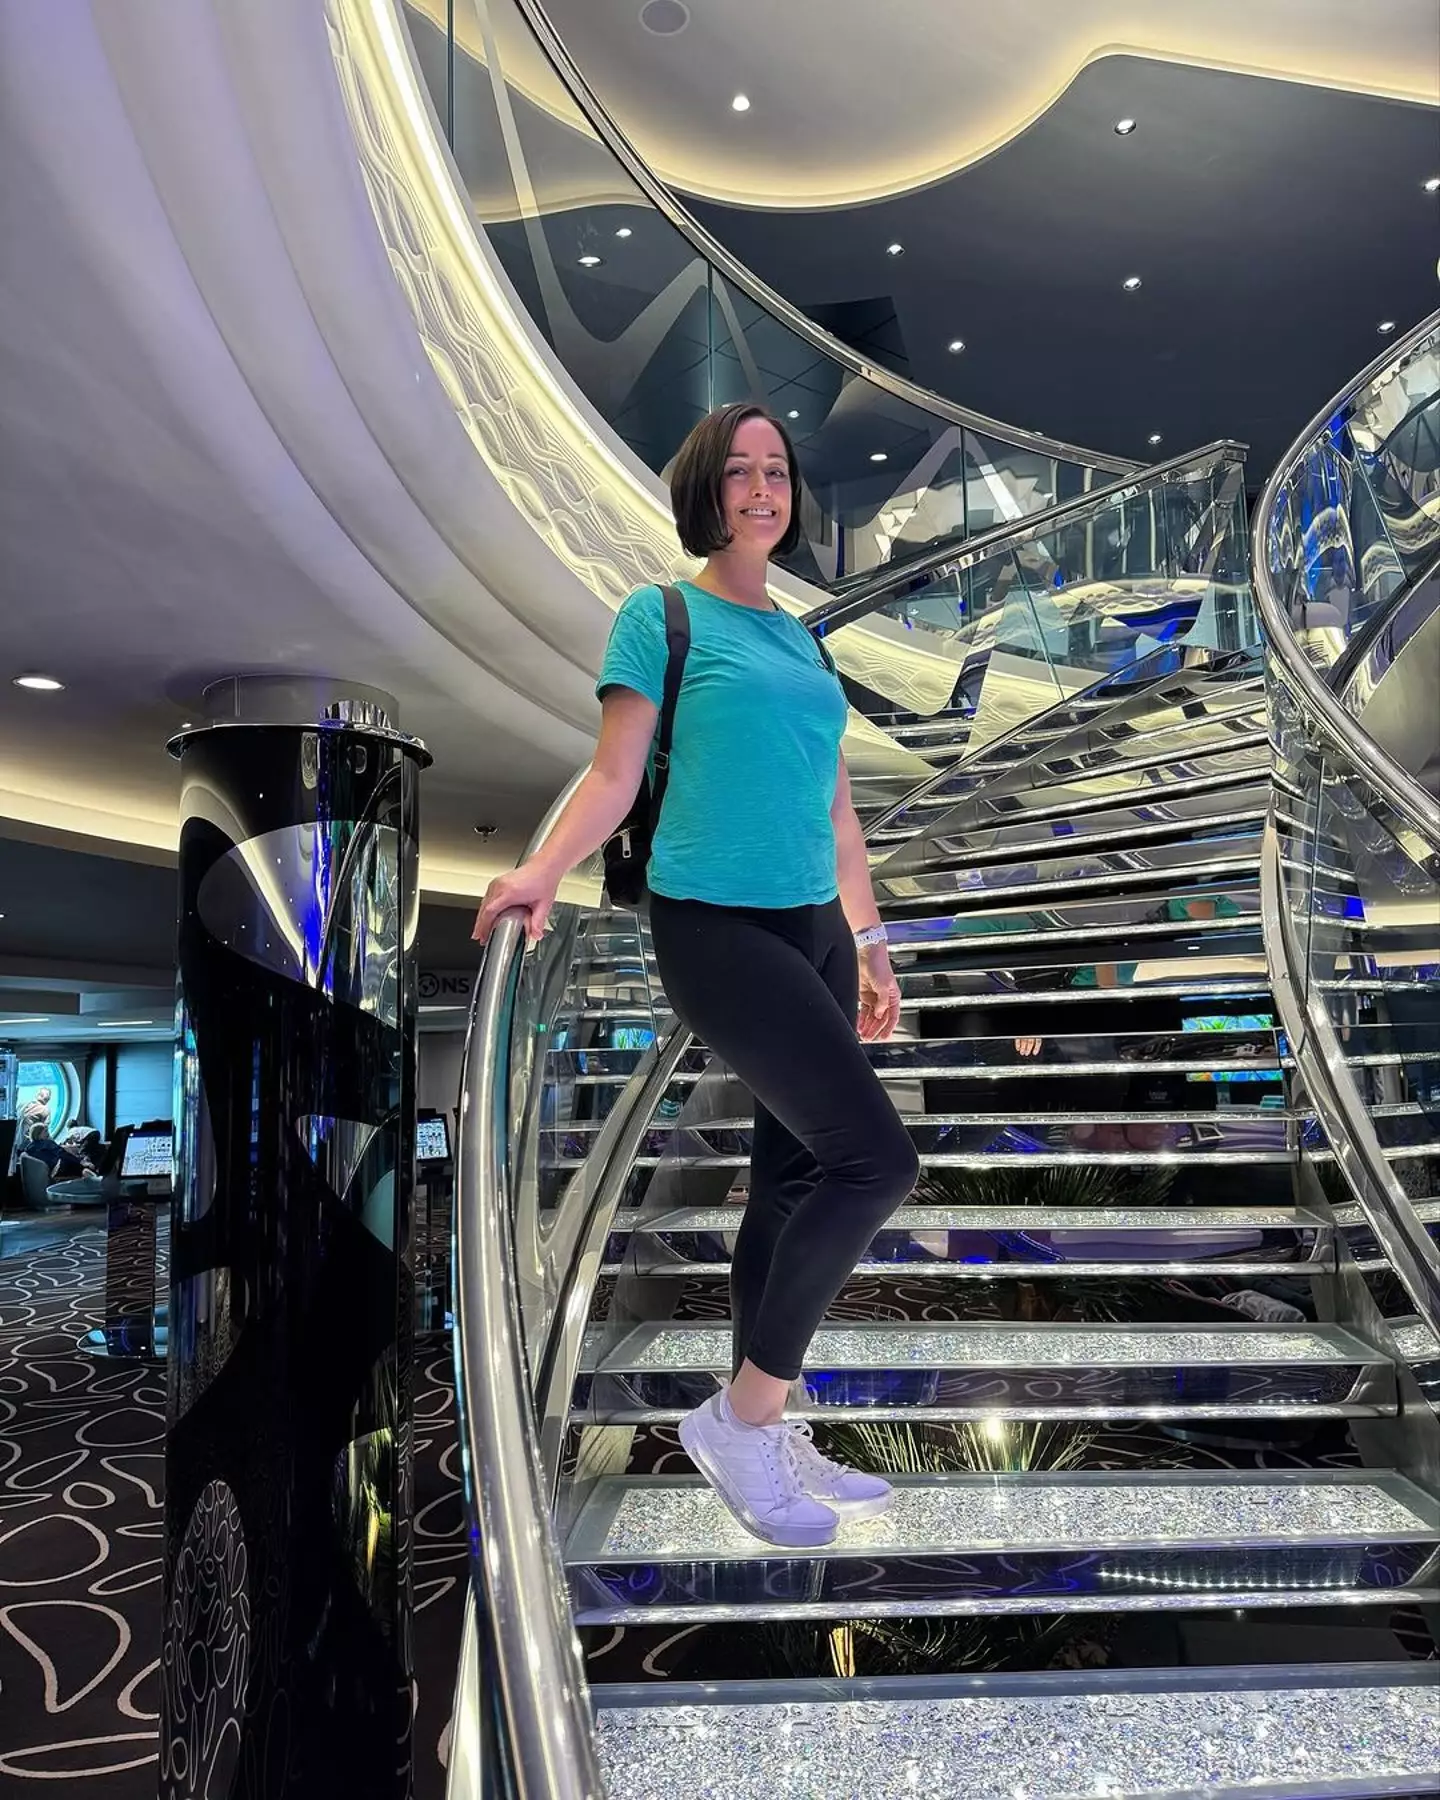 She recently went on an 'incredible' £99 cruise.